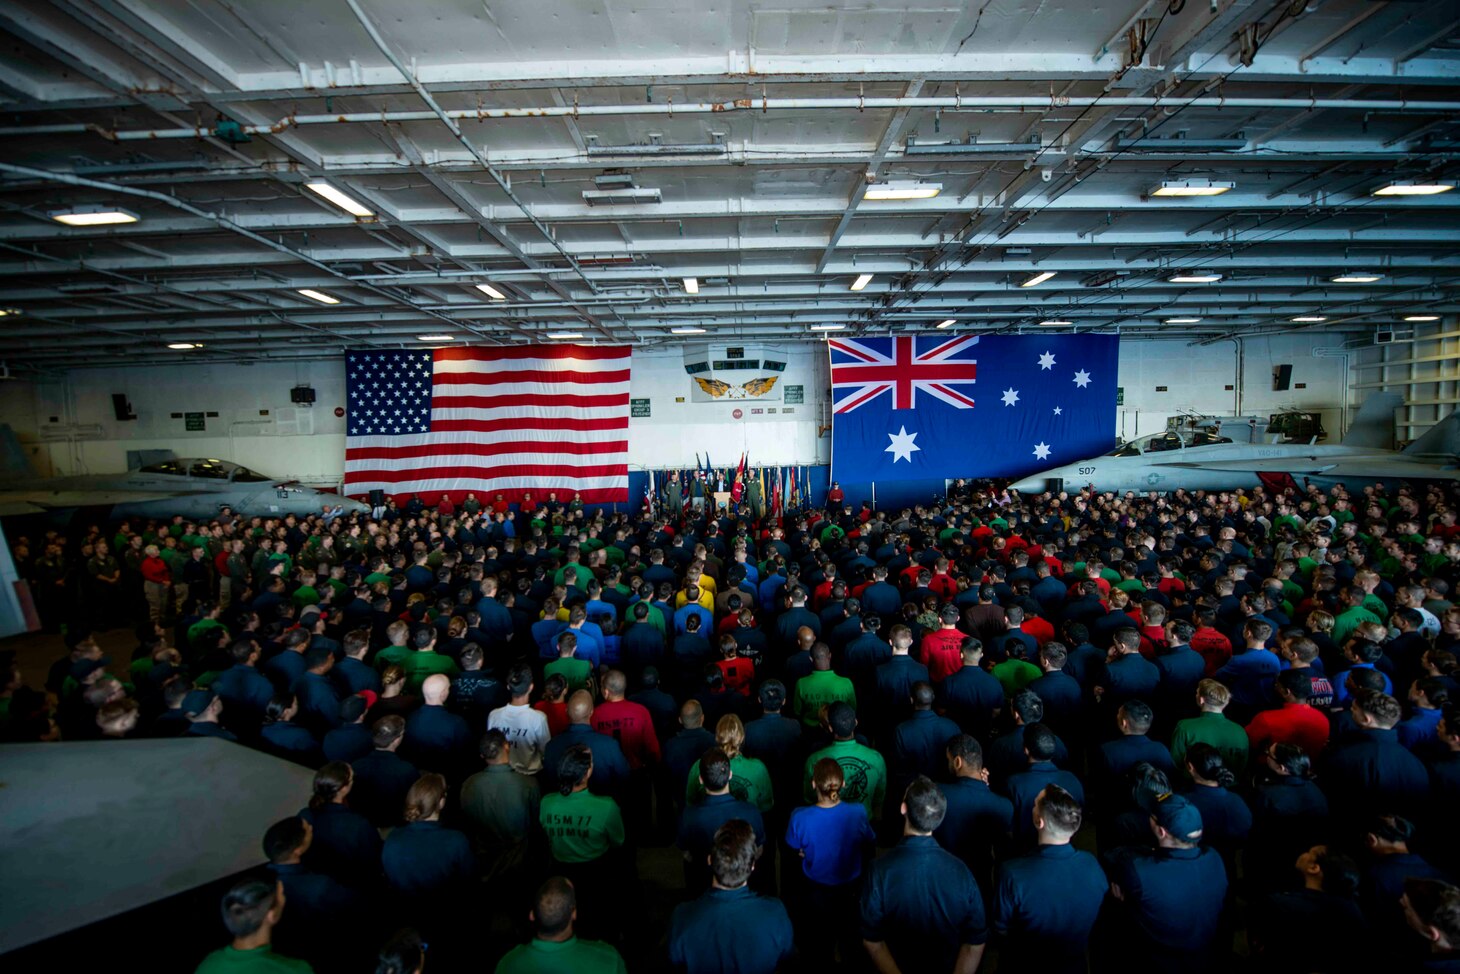 CORAL SEA (July 12, 2019) Prime Minister Scott Morrison, prime minister of Australia, speaks to Sailors aboard the Navy’s forward-deployed aircraft carrier USS Ronald Reagan (CVN 76) during Talisman Sabre 2019. Morrison was given a tour of the ship before speaking with the crew during an all-hands call. Talisman Sabre 2019 illustrates the closeness of the Australian and U.S. alliance and the strength of the military-to-military relationship. This is the eighth iteration of this exercise.